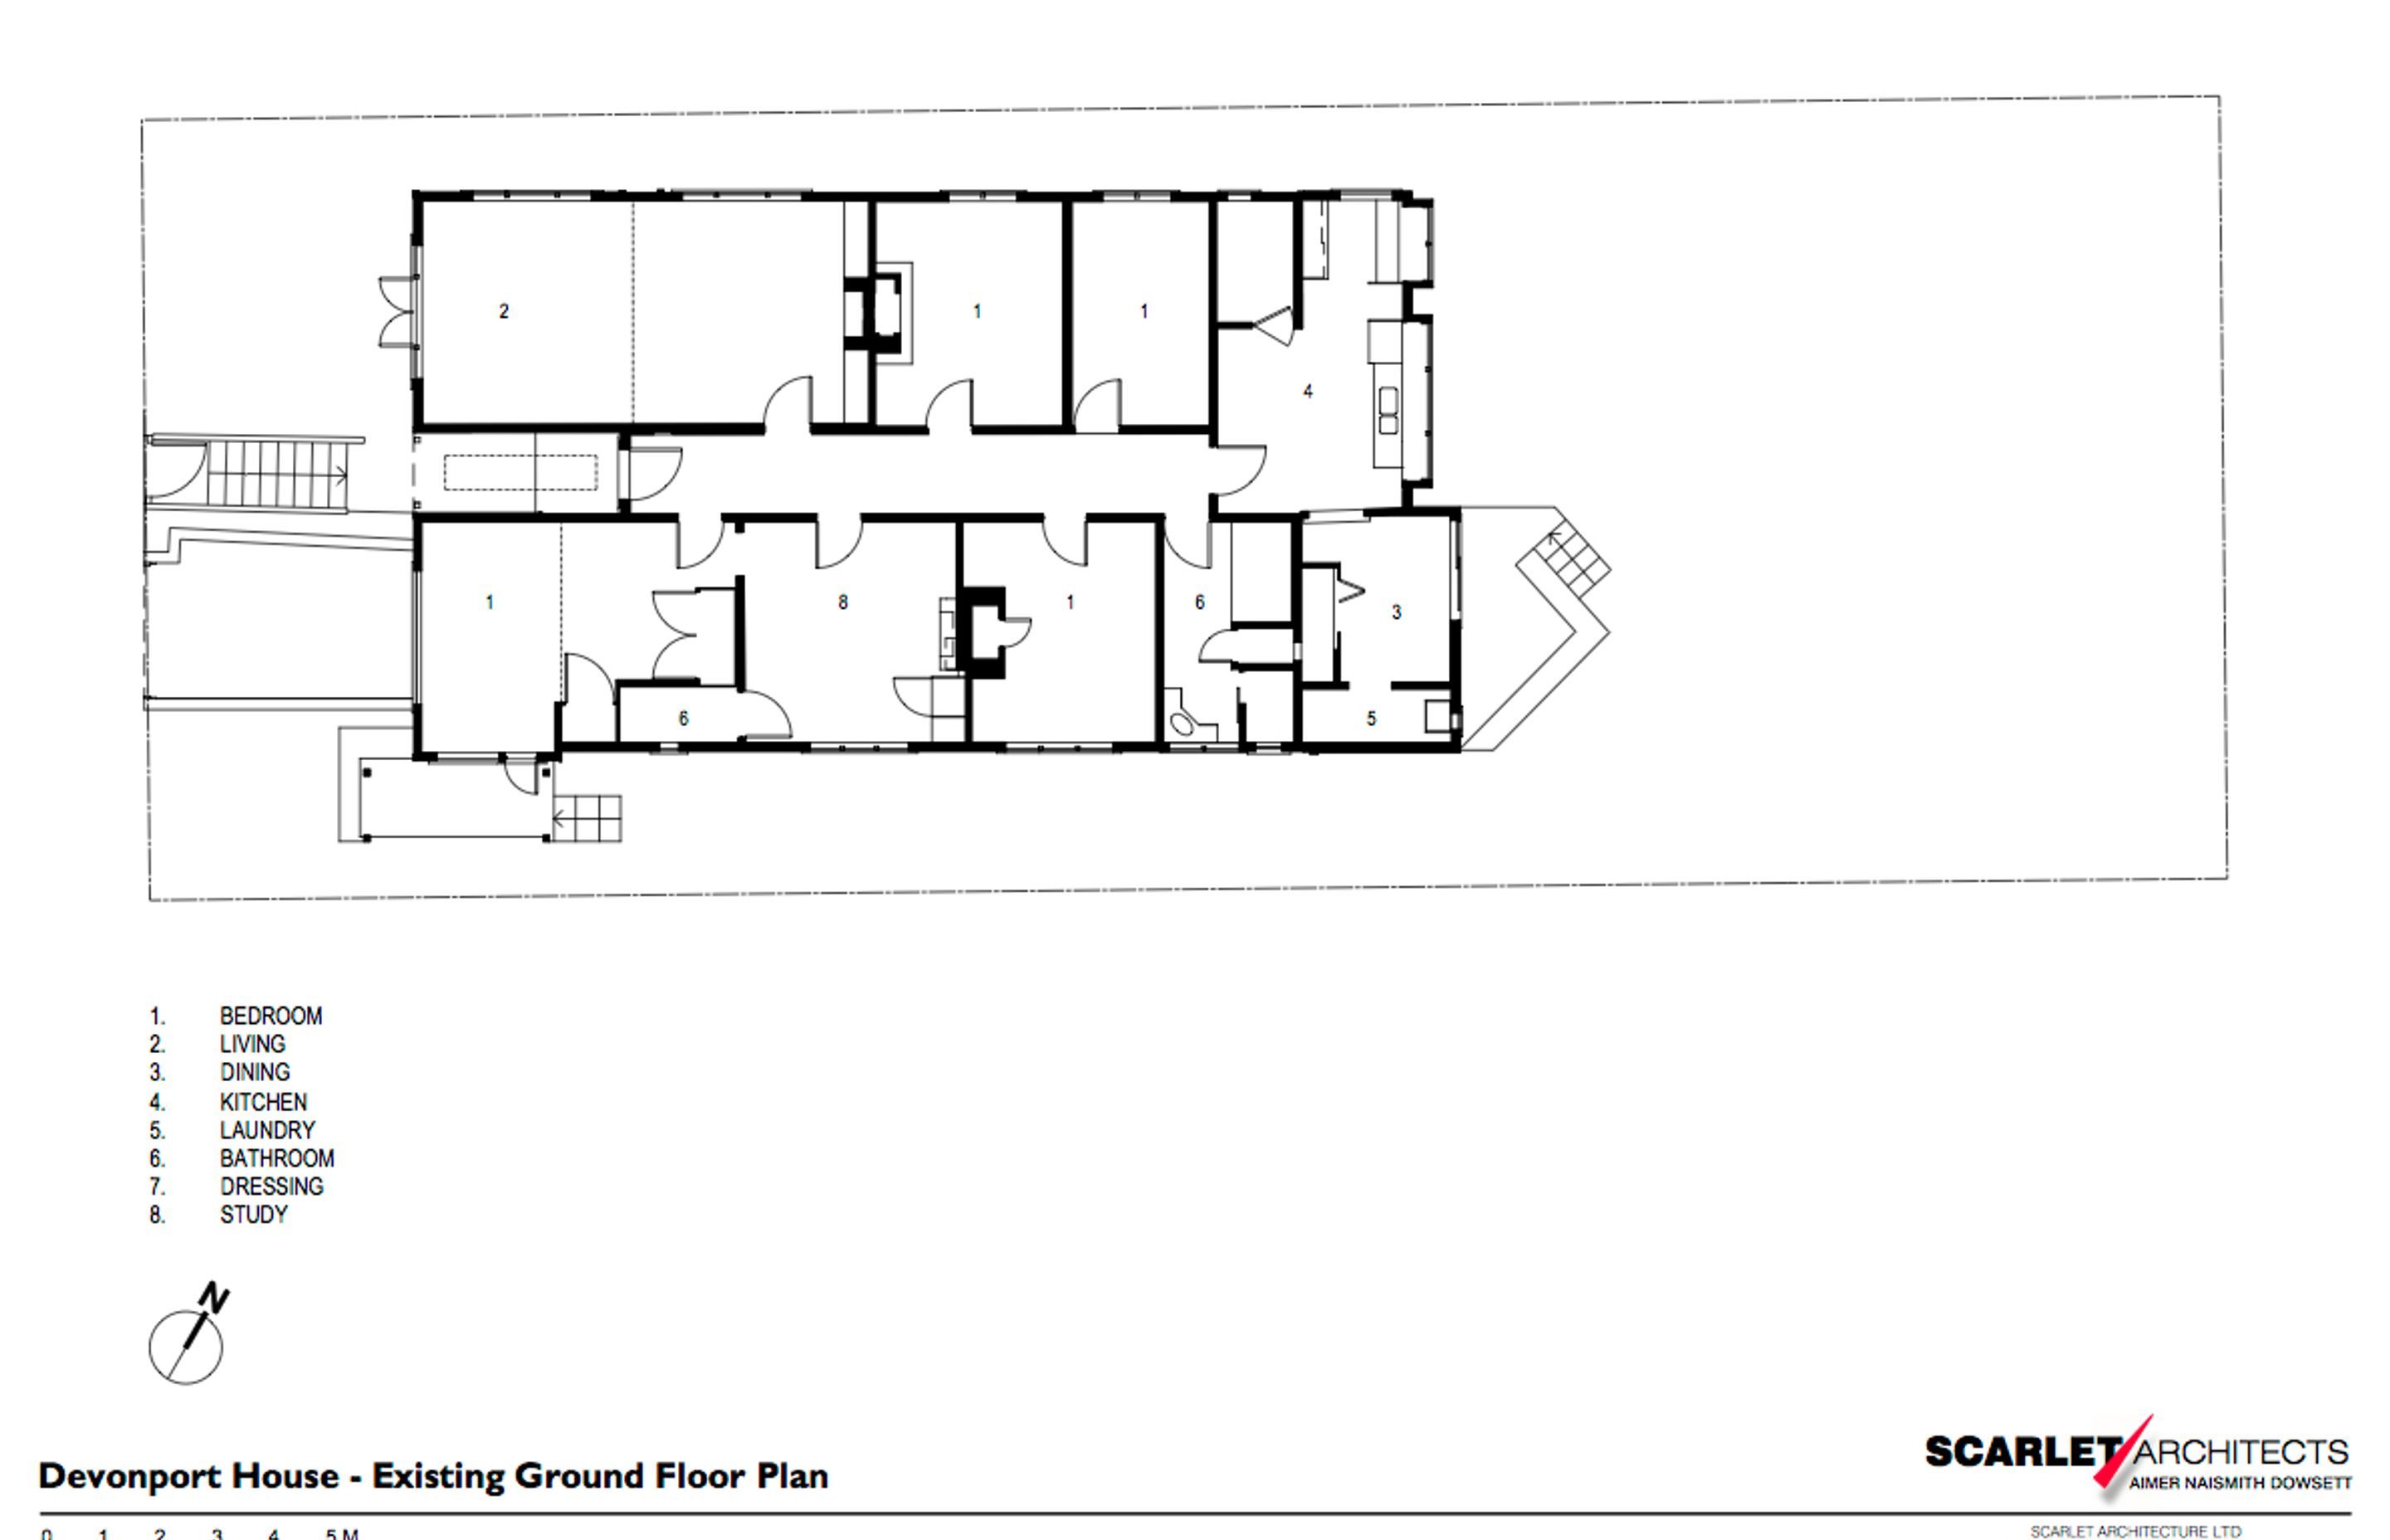 The existing ground-floor plan, by Scarlet Architects.